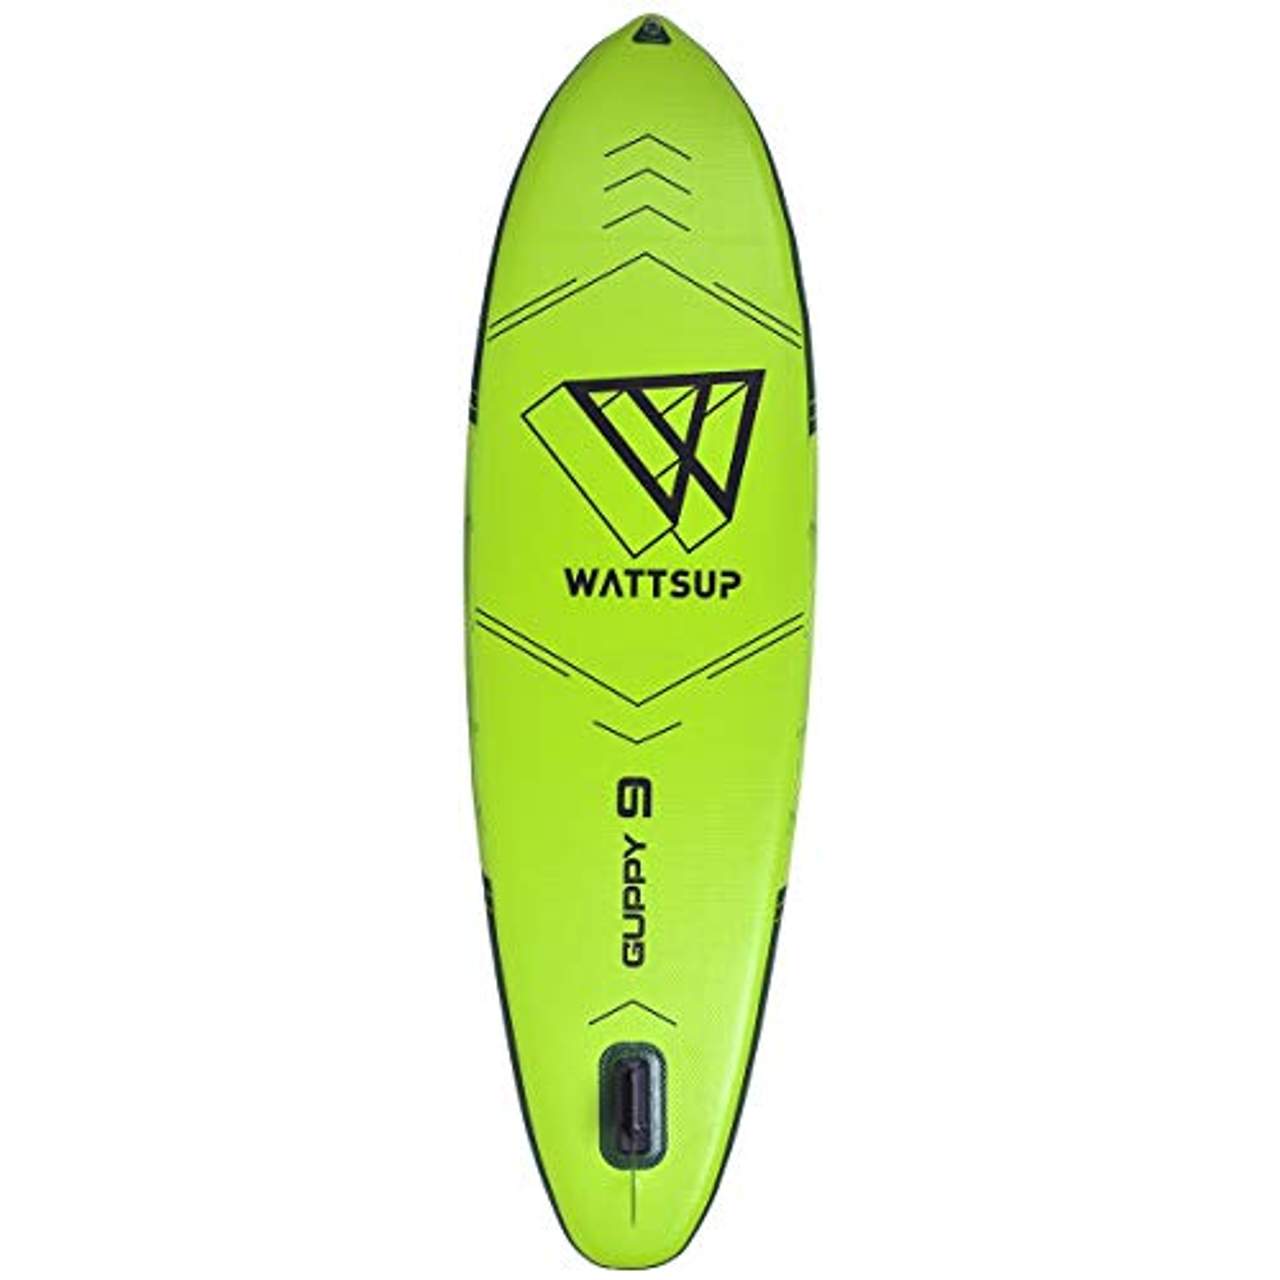 WS WattSUP Guppy 9’0” SUP Board Stand Up Paddle Surf-Board Paddel